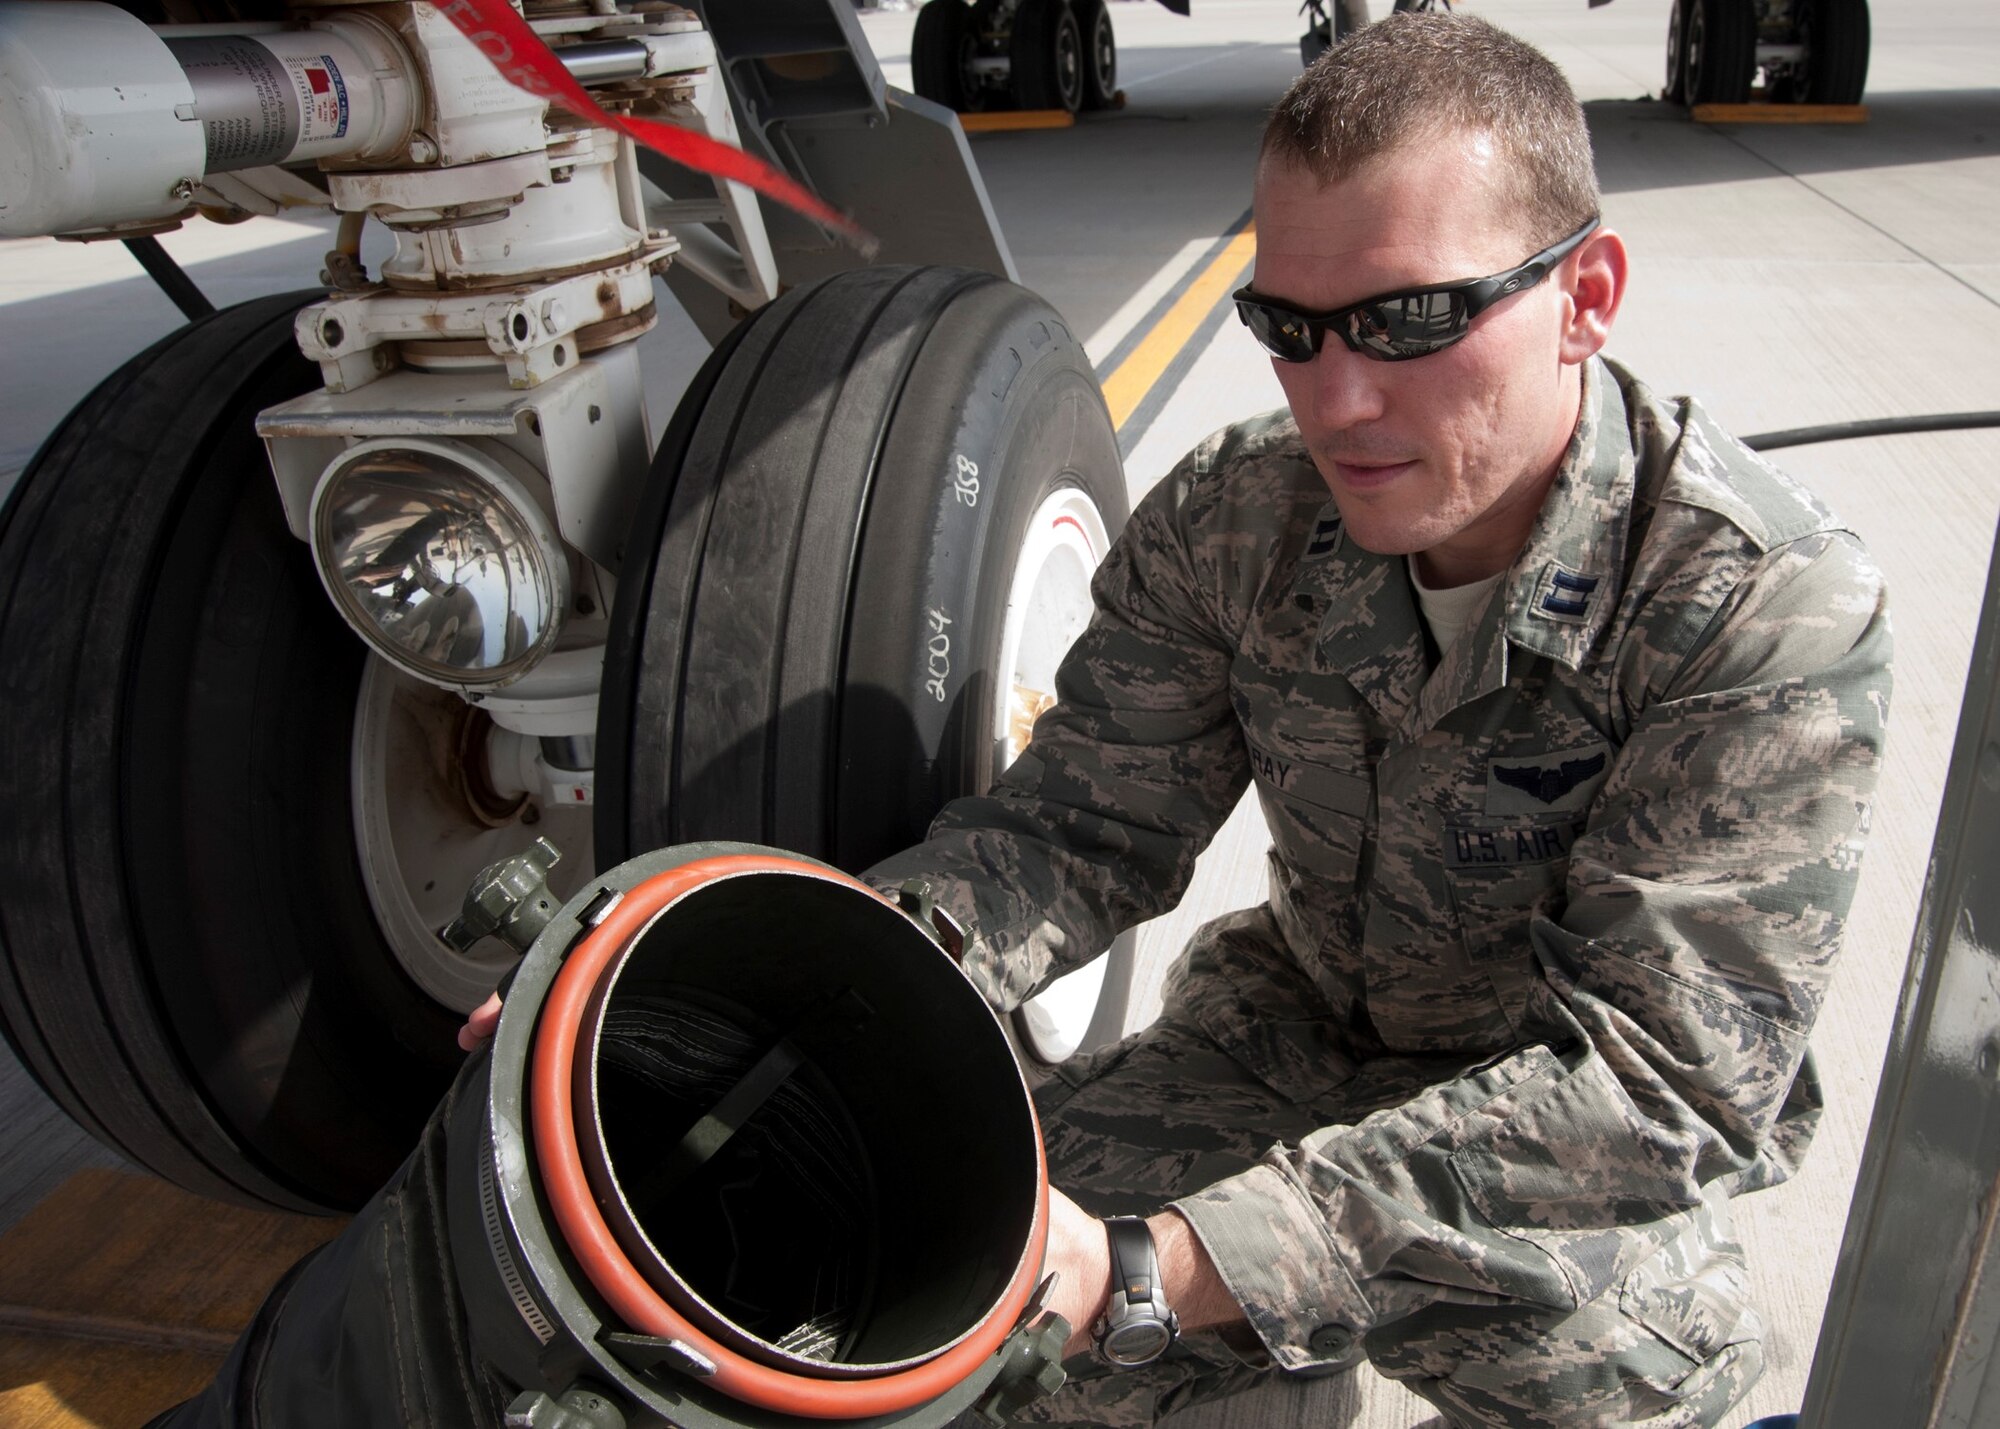 Capt. Eric Ray shows the tubing on a mobile air conditioning and heating unit prior to adding the cooling sock created by the 379th Expeditionary Operations Support Squadron aircrew flight equipment Airmen at the 379th Air Expeditionary Wing Aug. 7, 2013, in Southwest Asia. Ray is the 379th EOSS aircrew flight equipment flight officer, deployed from Altus Air Force Base, Okla.